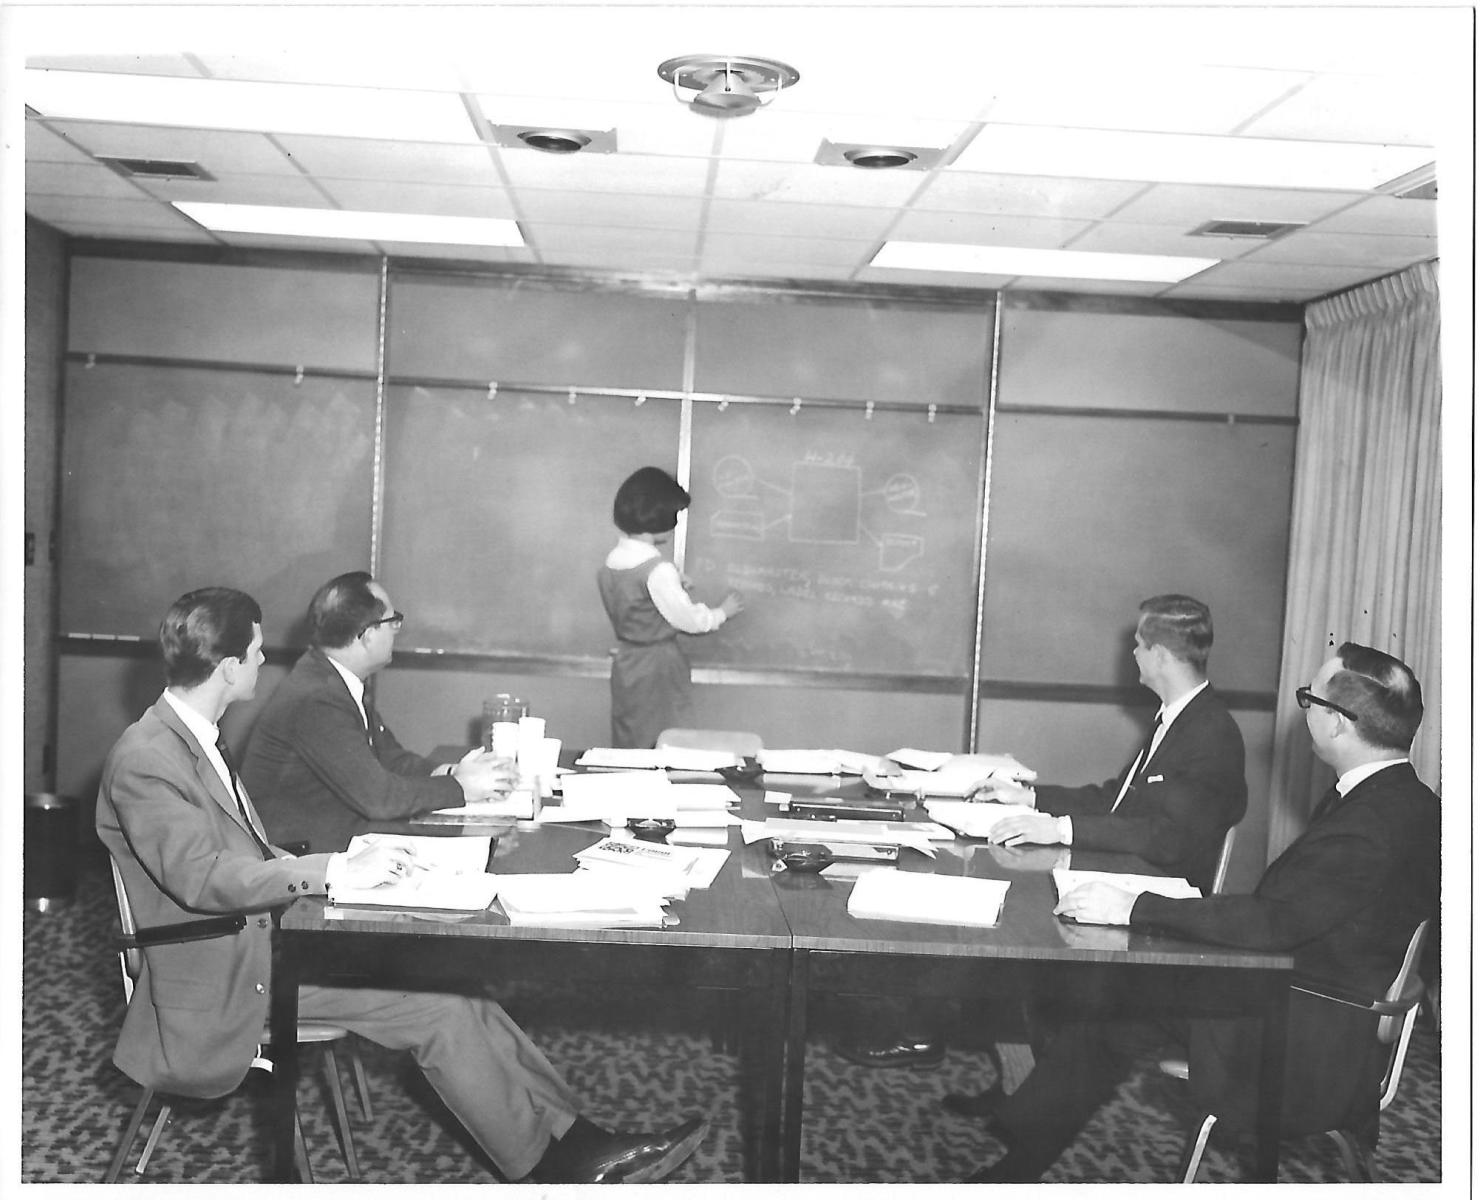 A black and white photo of four men in suits and a woman in a dress. The woman is drawing diagrams on the blackboard, while the men watch from a table filled with papers.